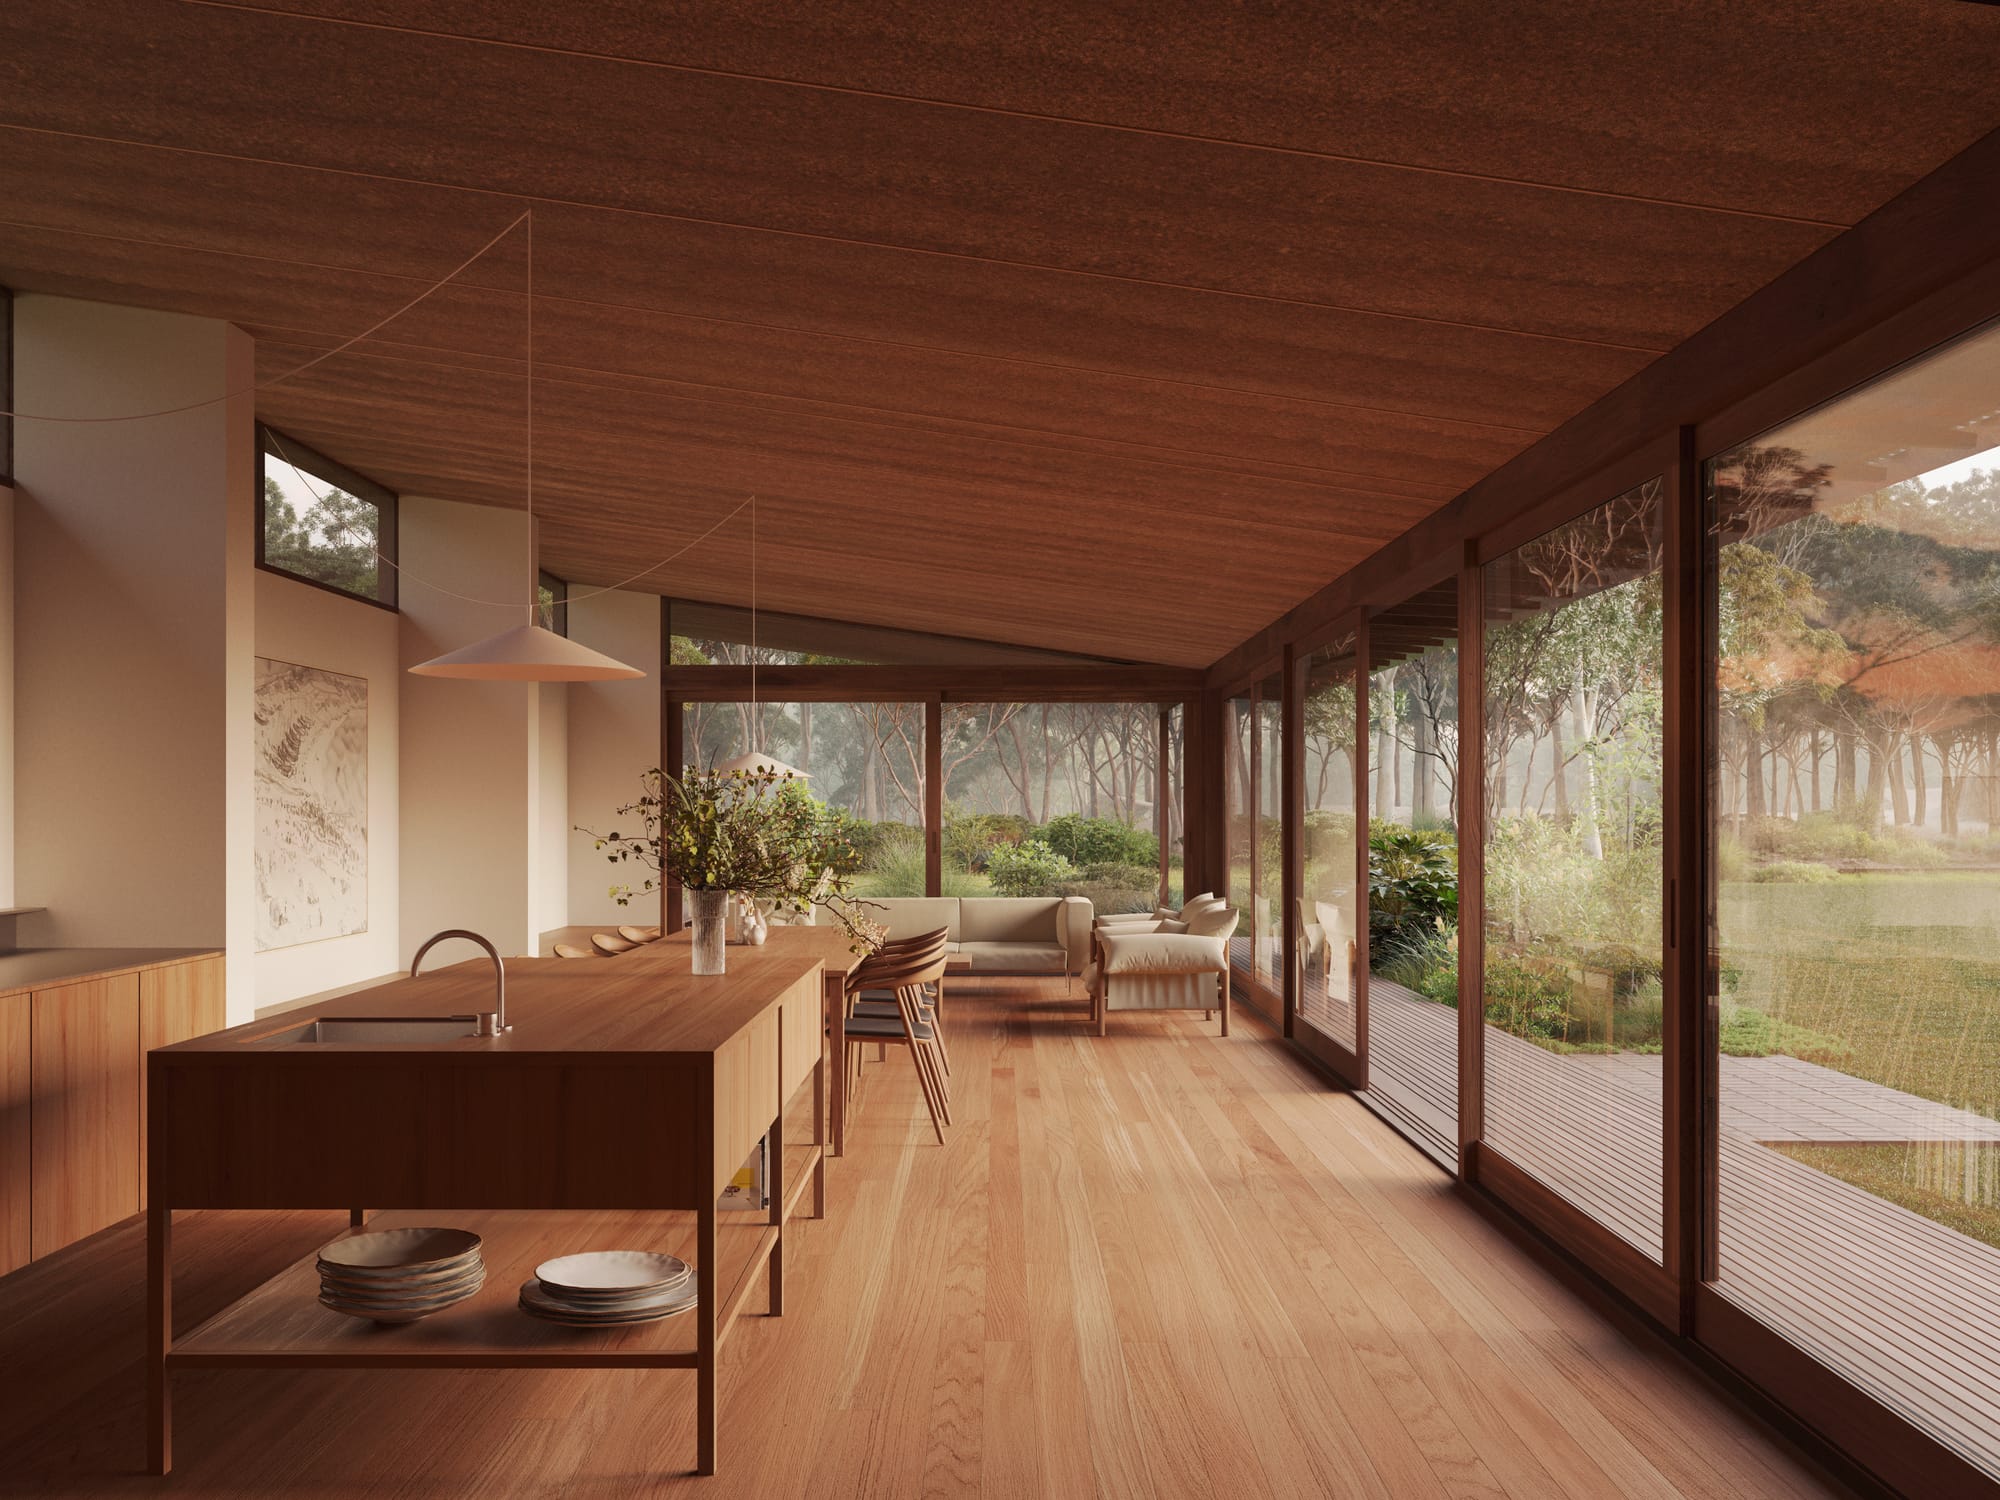 Corymbia House. Renders copyright of CHOIRENDER. Pavilion home with angled timber veneer ceiling. Timber flooring and kitchen. Windows overlooking green grass and gardens.